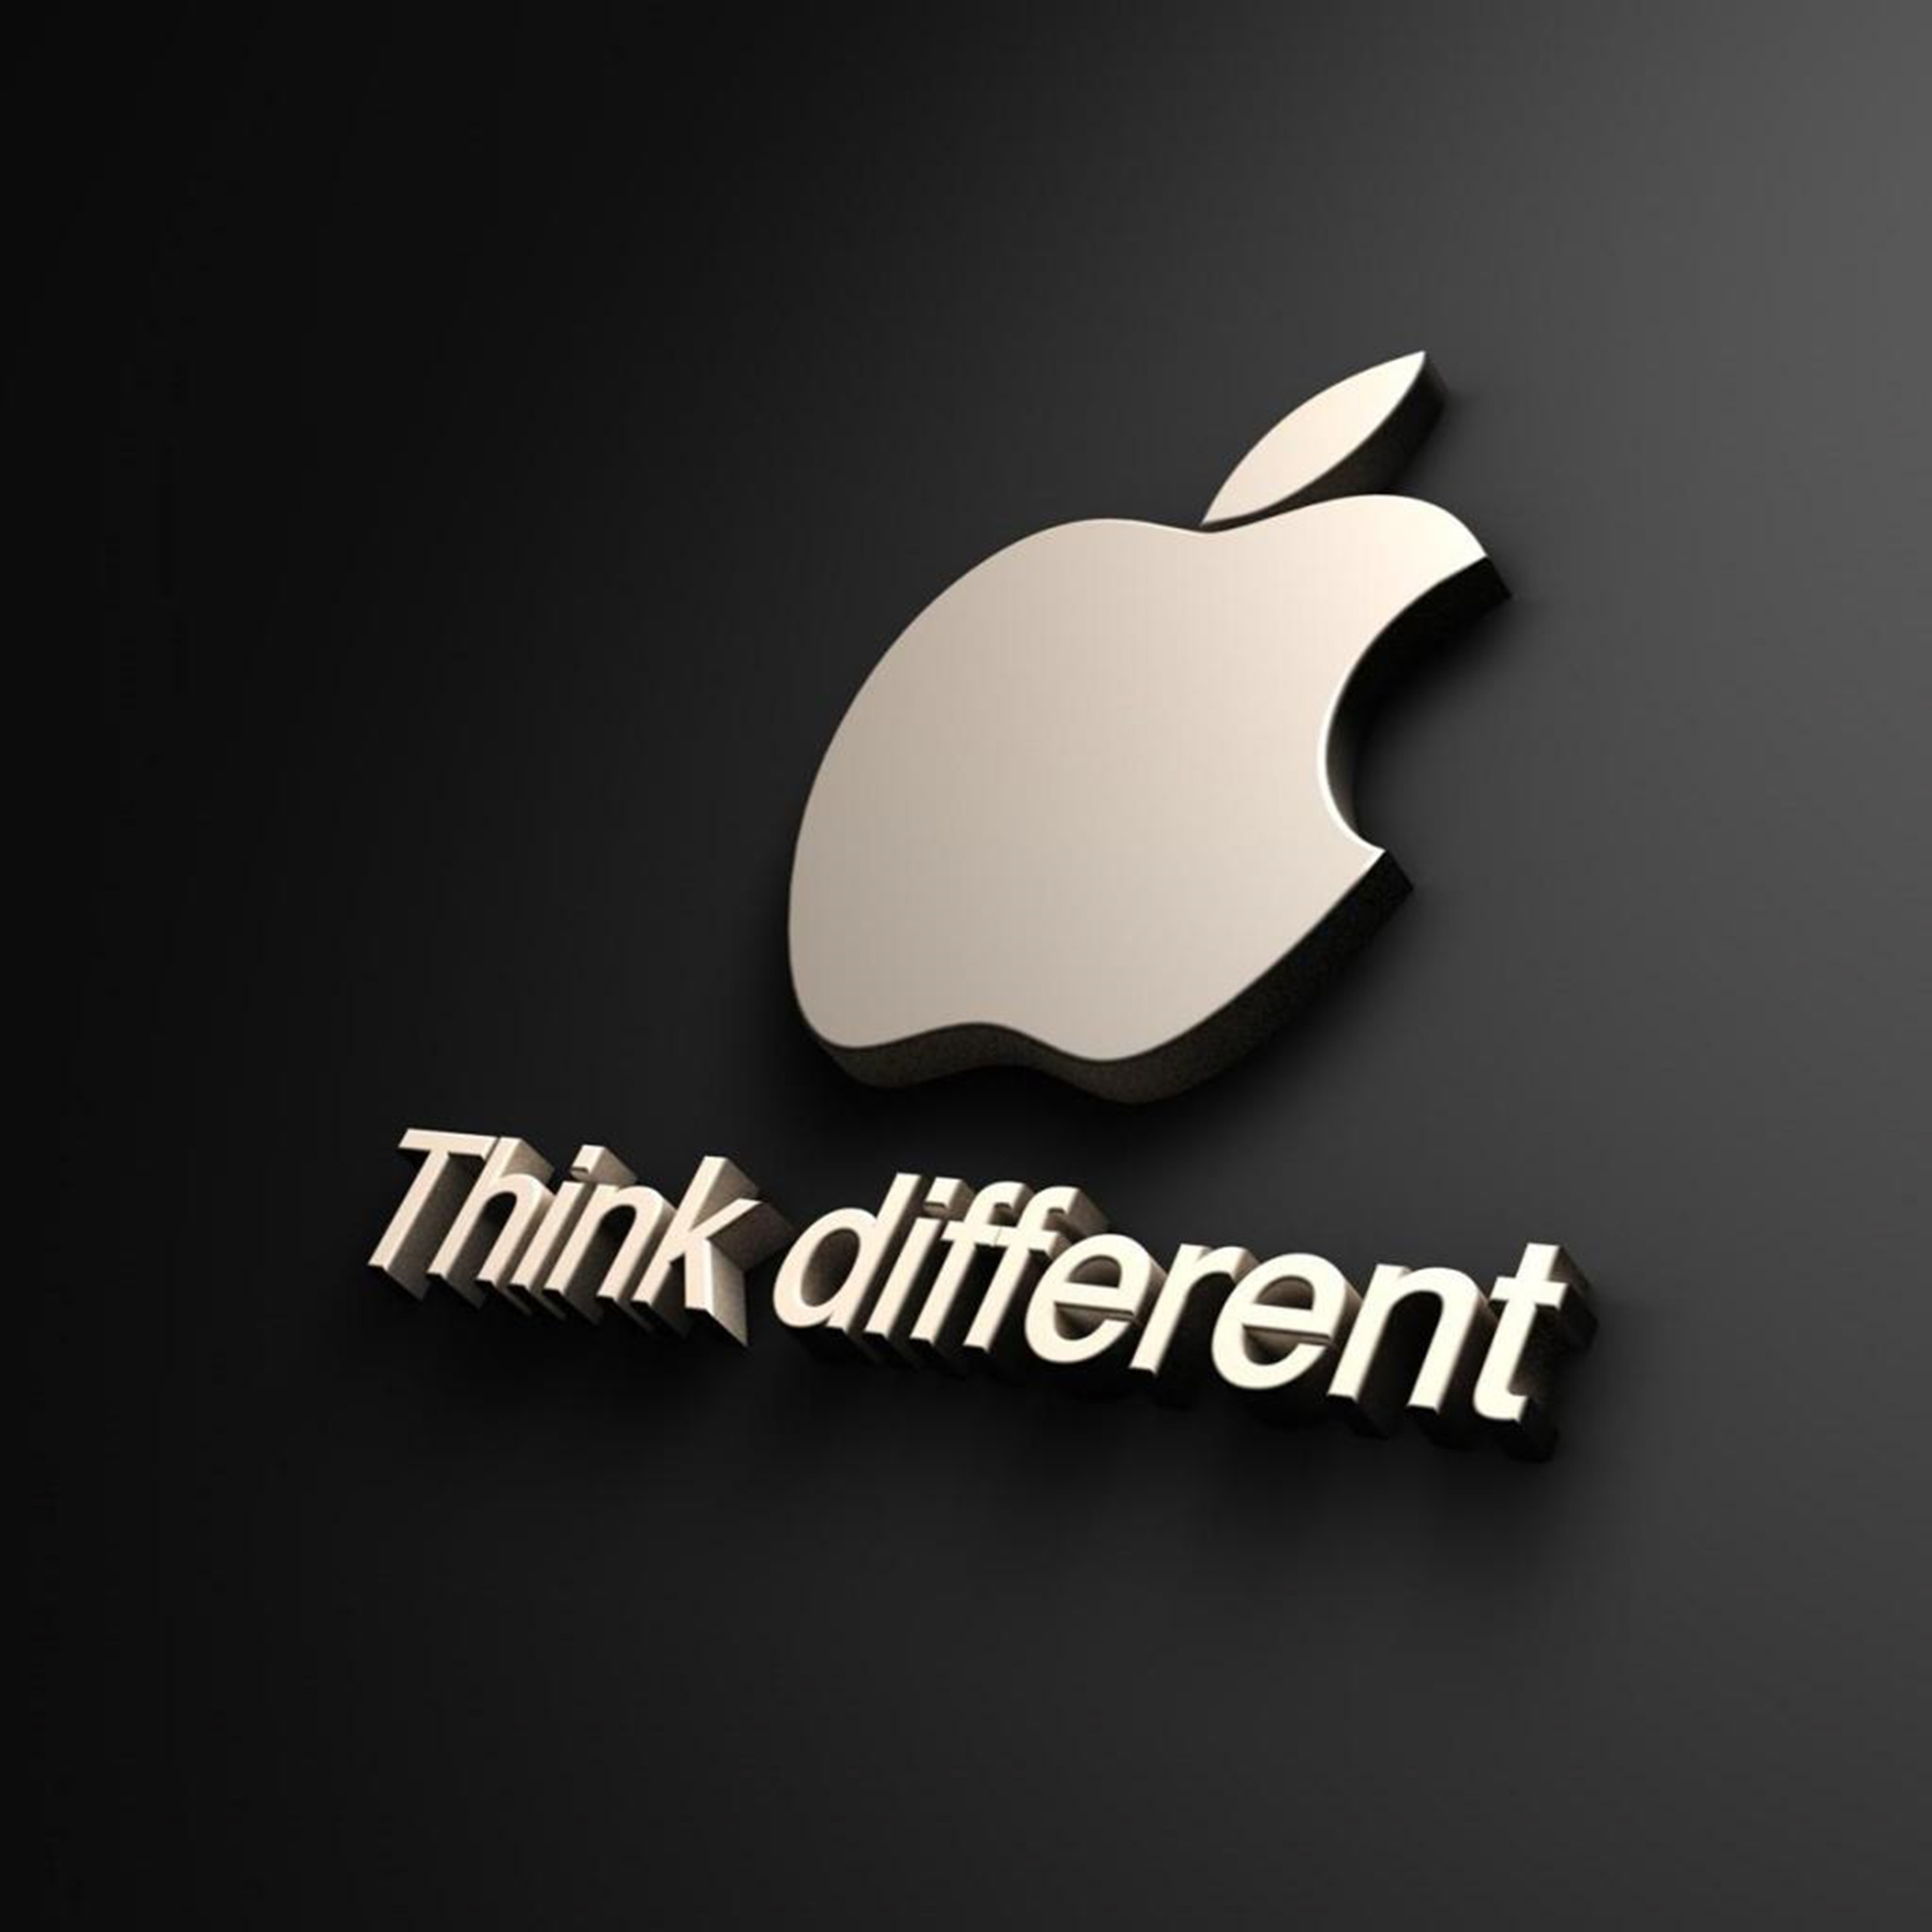 iPad backgrounds Apple Think Different Ipad Wallpaper